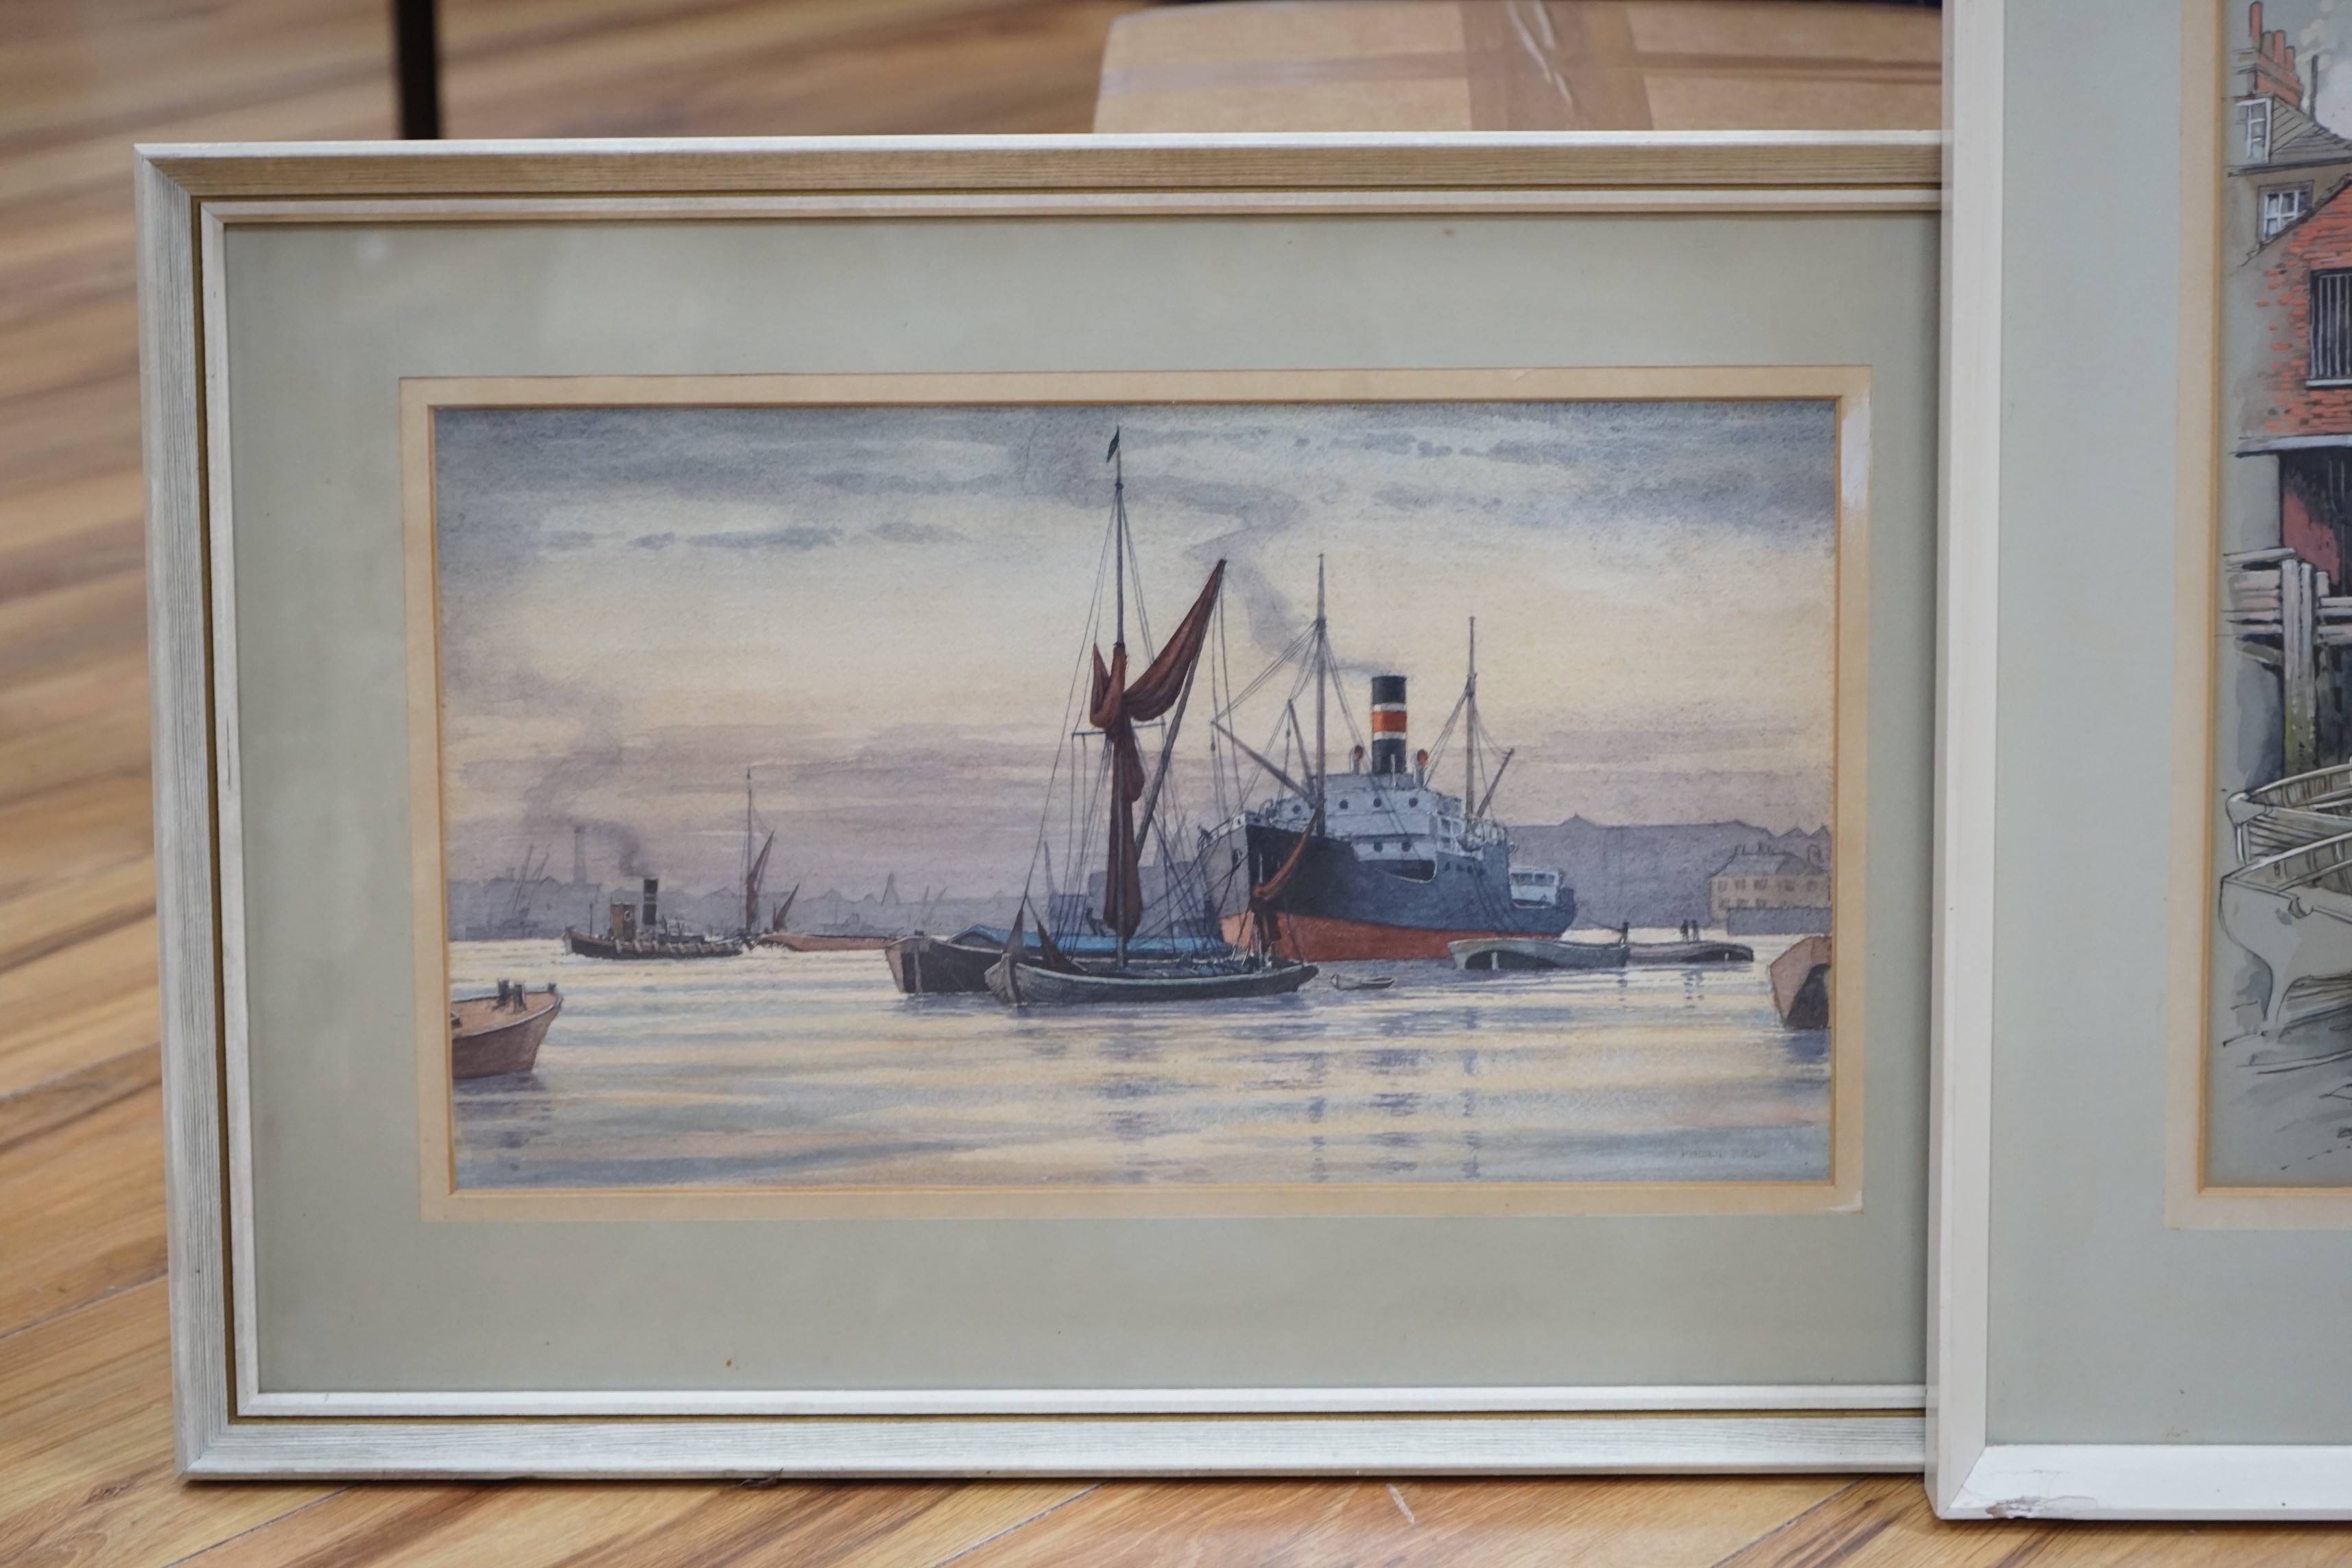 Philip Bear (b.1932), three watercolours, 'Dredging', 'Greenwich Riverside' and 'Shipping in harbour', signed, largest 23 x 40cm